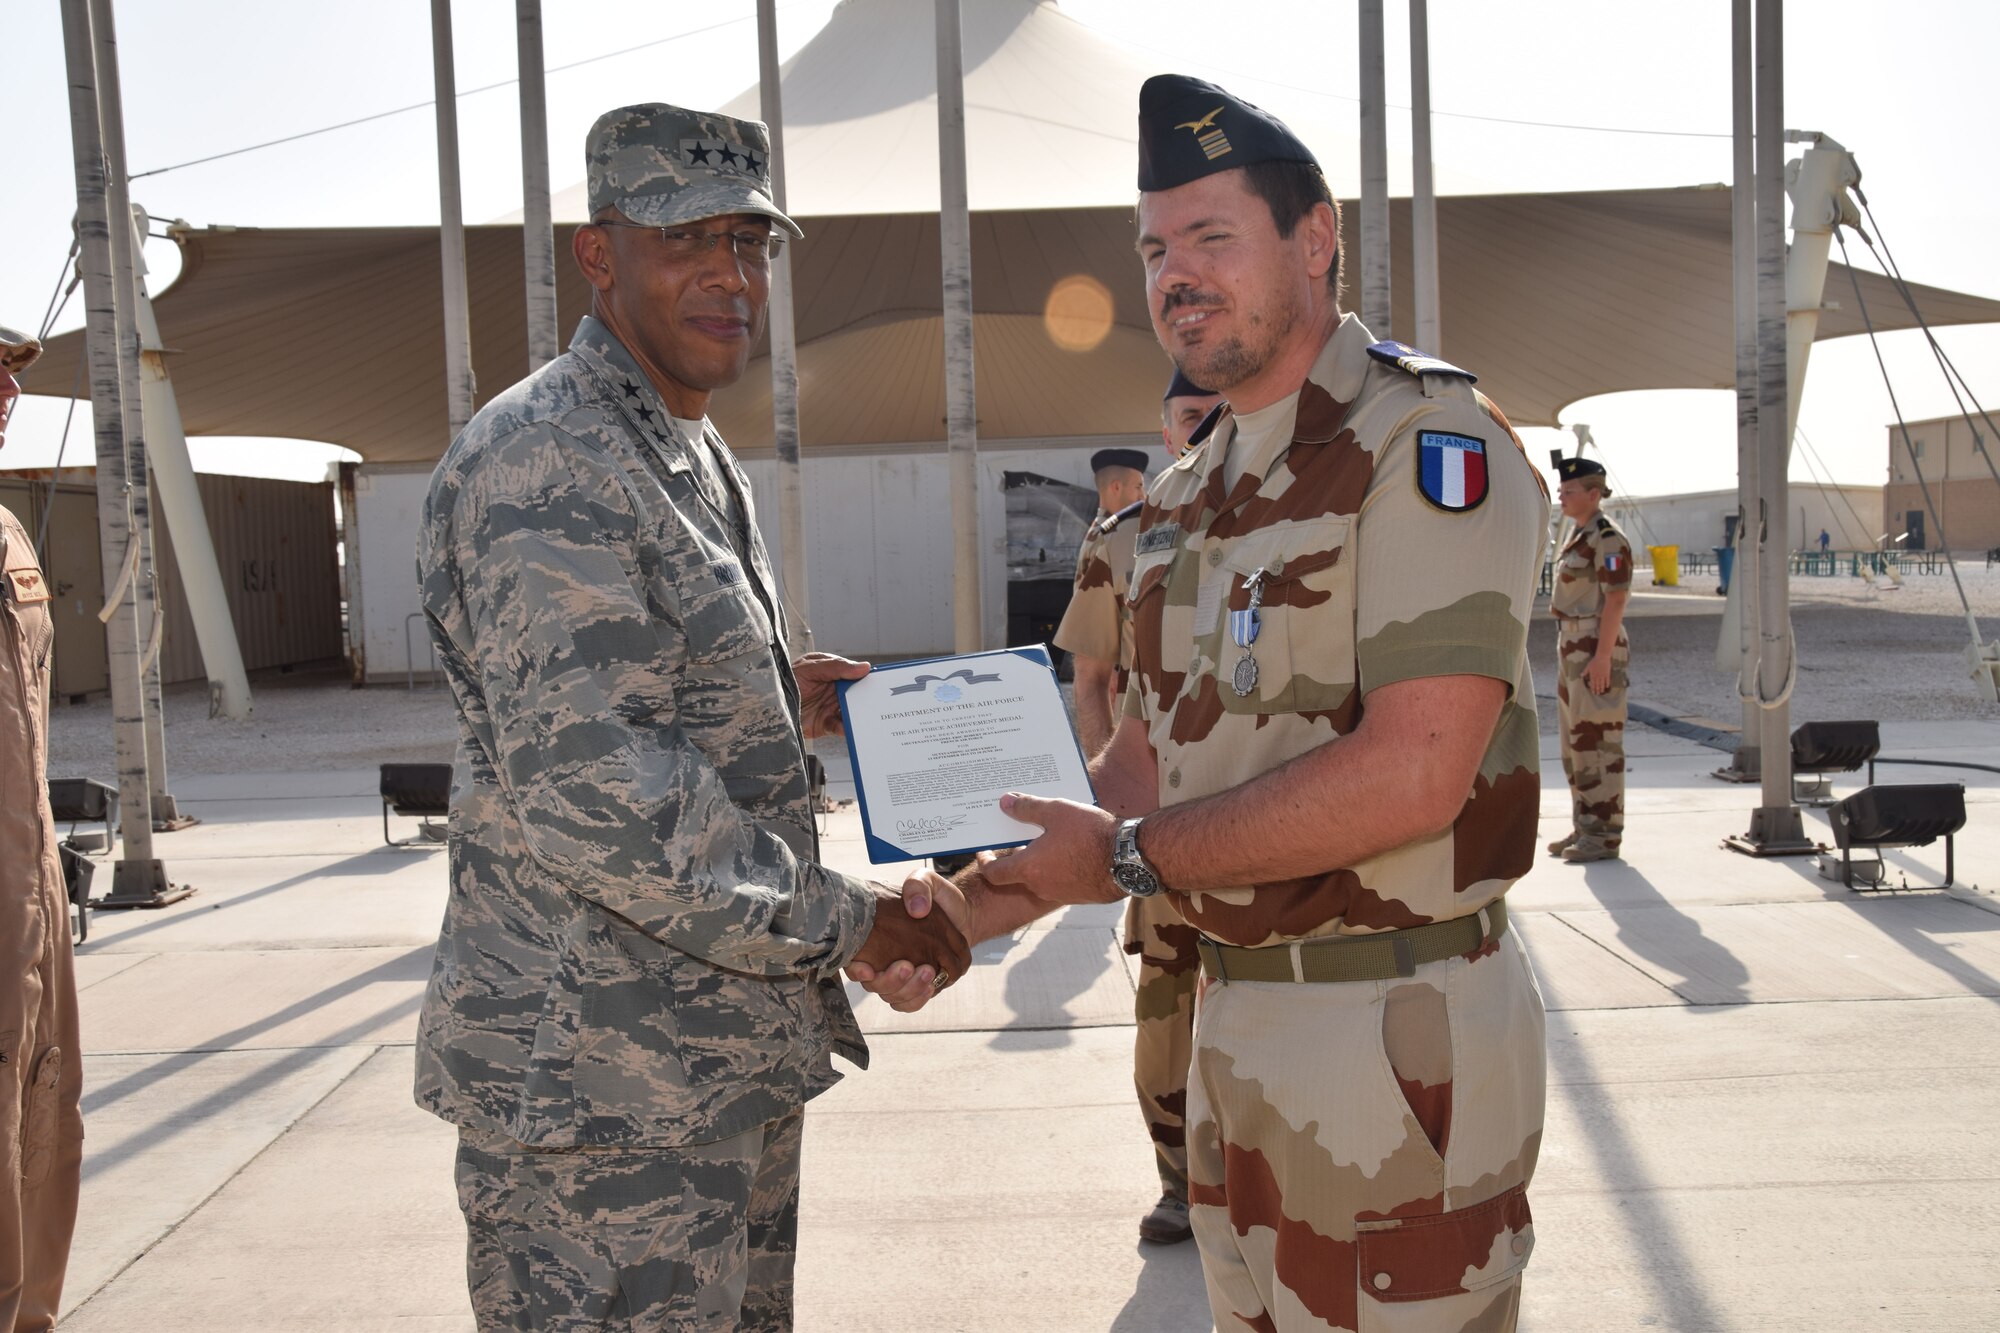 Lt. Gen. Charles Brown, U.S. Air Forces Central Command commander, awards an Air Force Achievement Medal to French Air Force Lt. Col. Eric Konietzko, French liaison officer, during the Bastille Day ceremony July 14, 2016, at Al Udeid Air Base, Qatar. The Air Force Achievement Medal is given to members for outstanding achievement or meritorious service rendered specifically on behalf of the U.S. Air Force. France is one of 20 nations supporting the air Coalition that provides decisive air and space power to combat Daesh and other terrorist organizations and ensure the stability of the Southwest Asia region. (U.S. Air Force photo/Technical Sgt. Carlos J. Treviño/Released)
